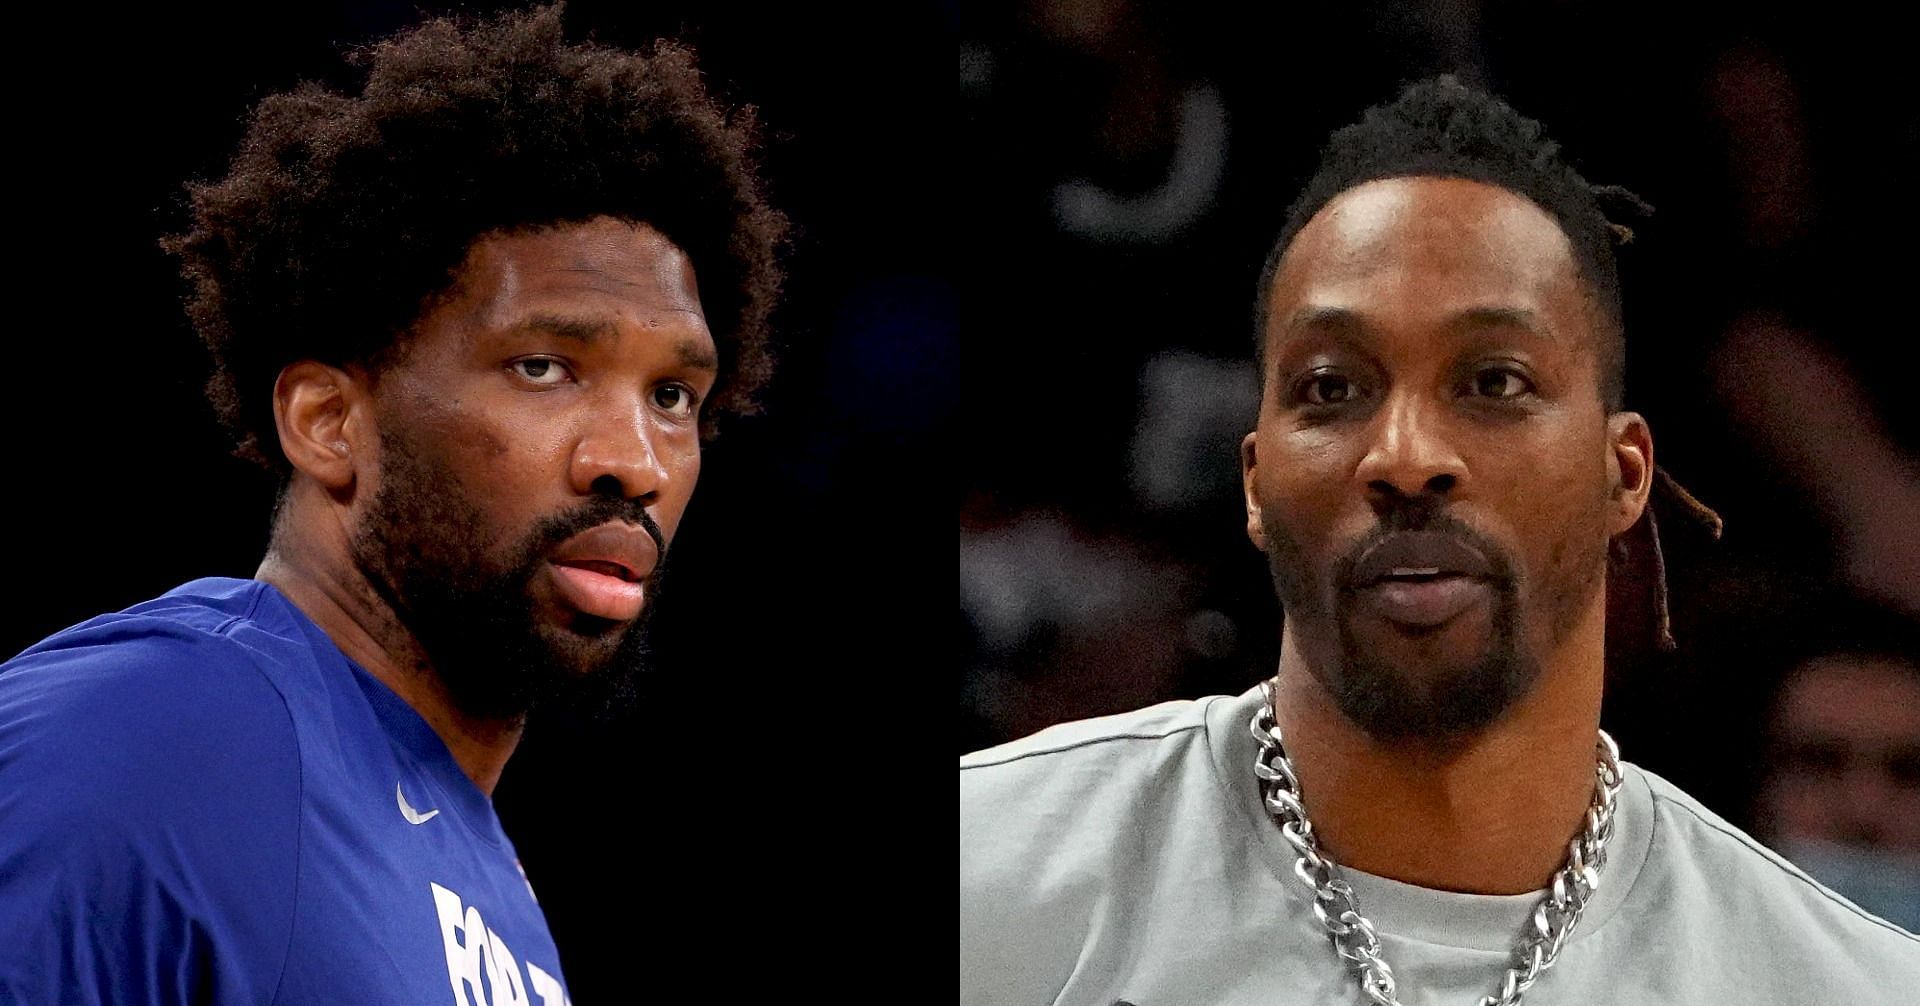 Dwight Howard shares insight on Joel Embiid&rsquo;s injury woes, suggests potentially career-altering advice